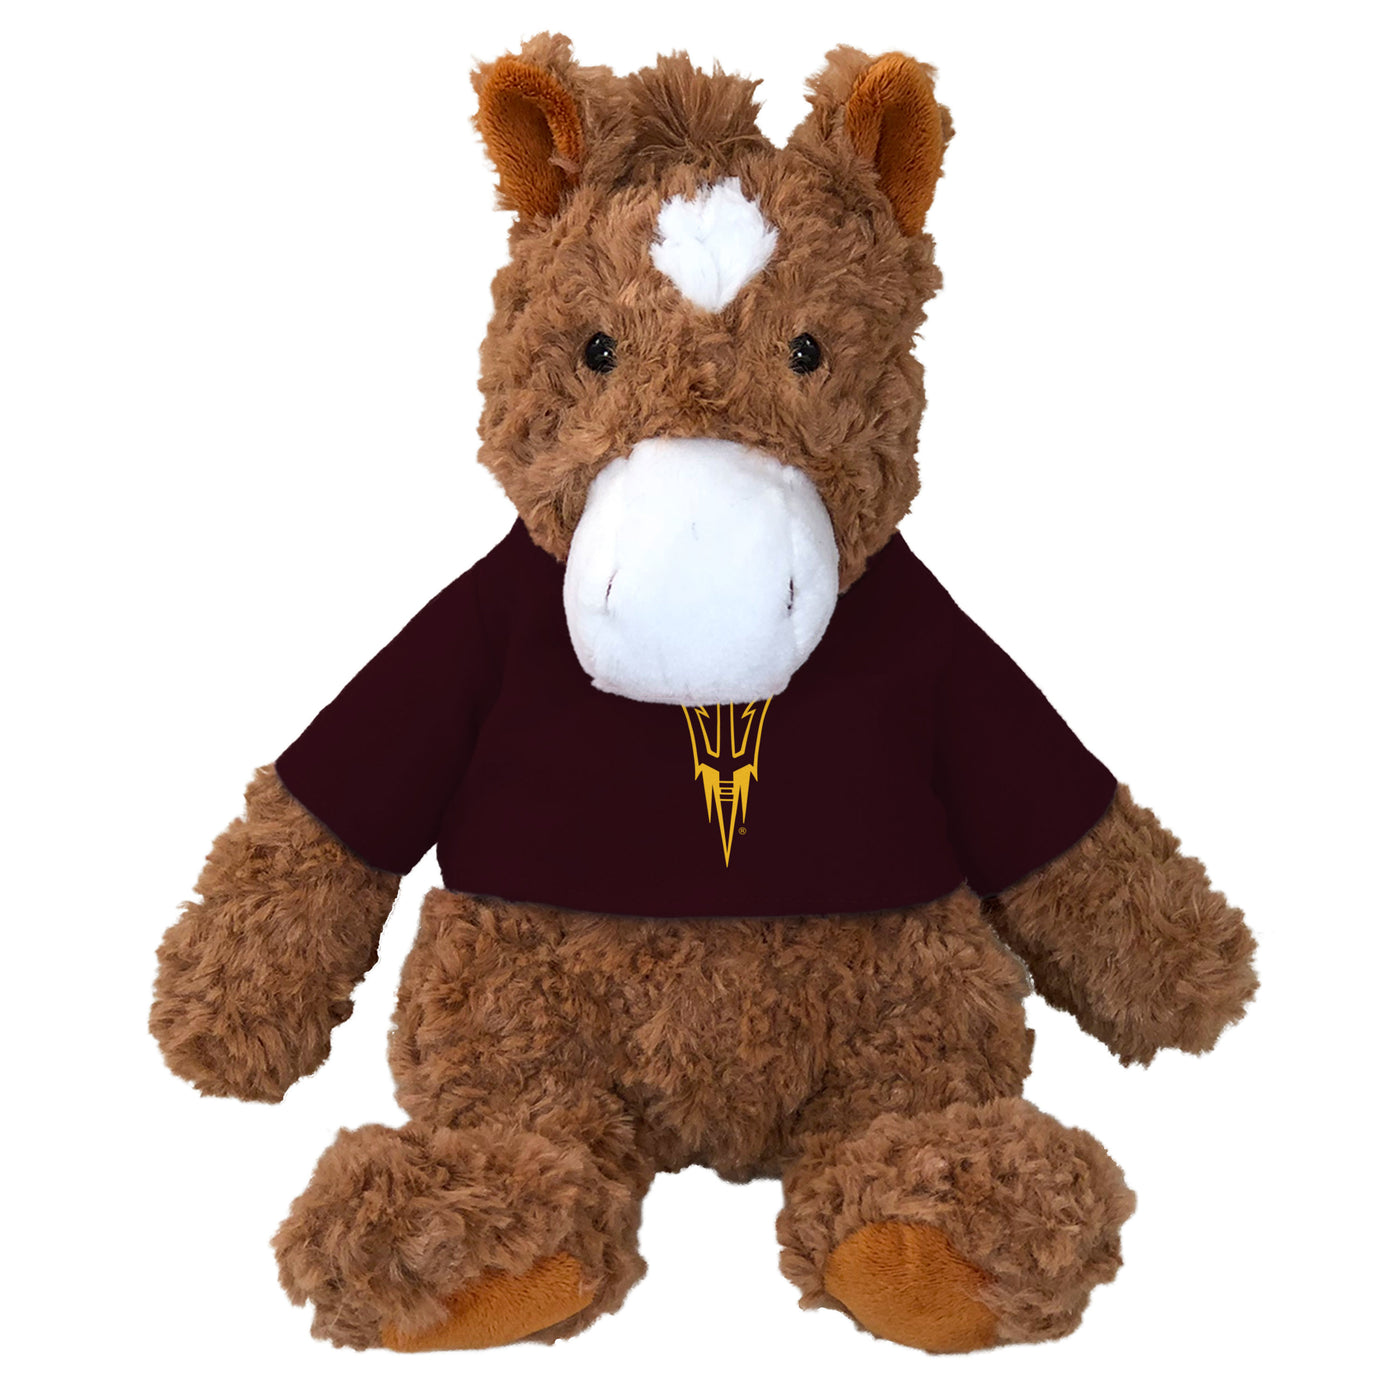 ASU Stuffed brown and white horse. Horse is wearing a maroon shirt with gold pitchfork outline. 